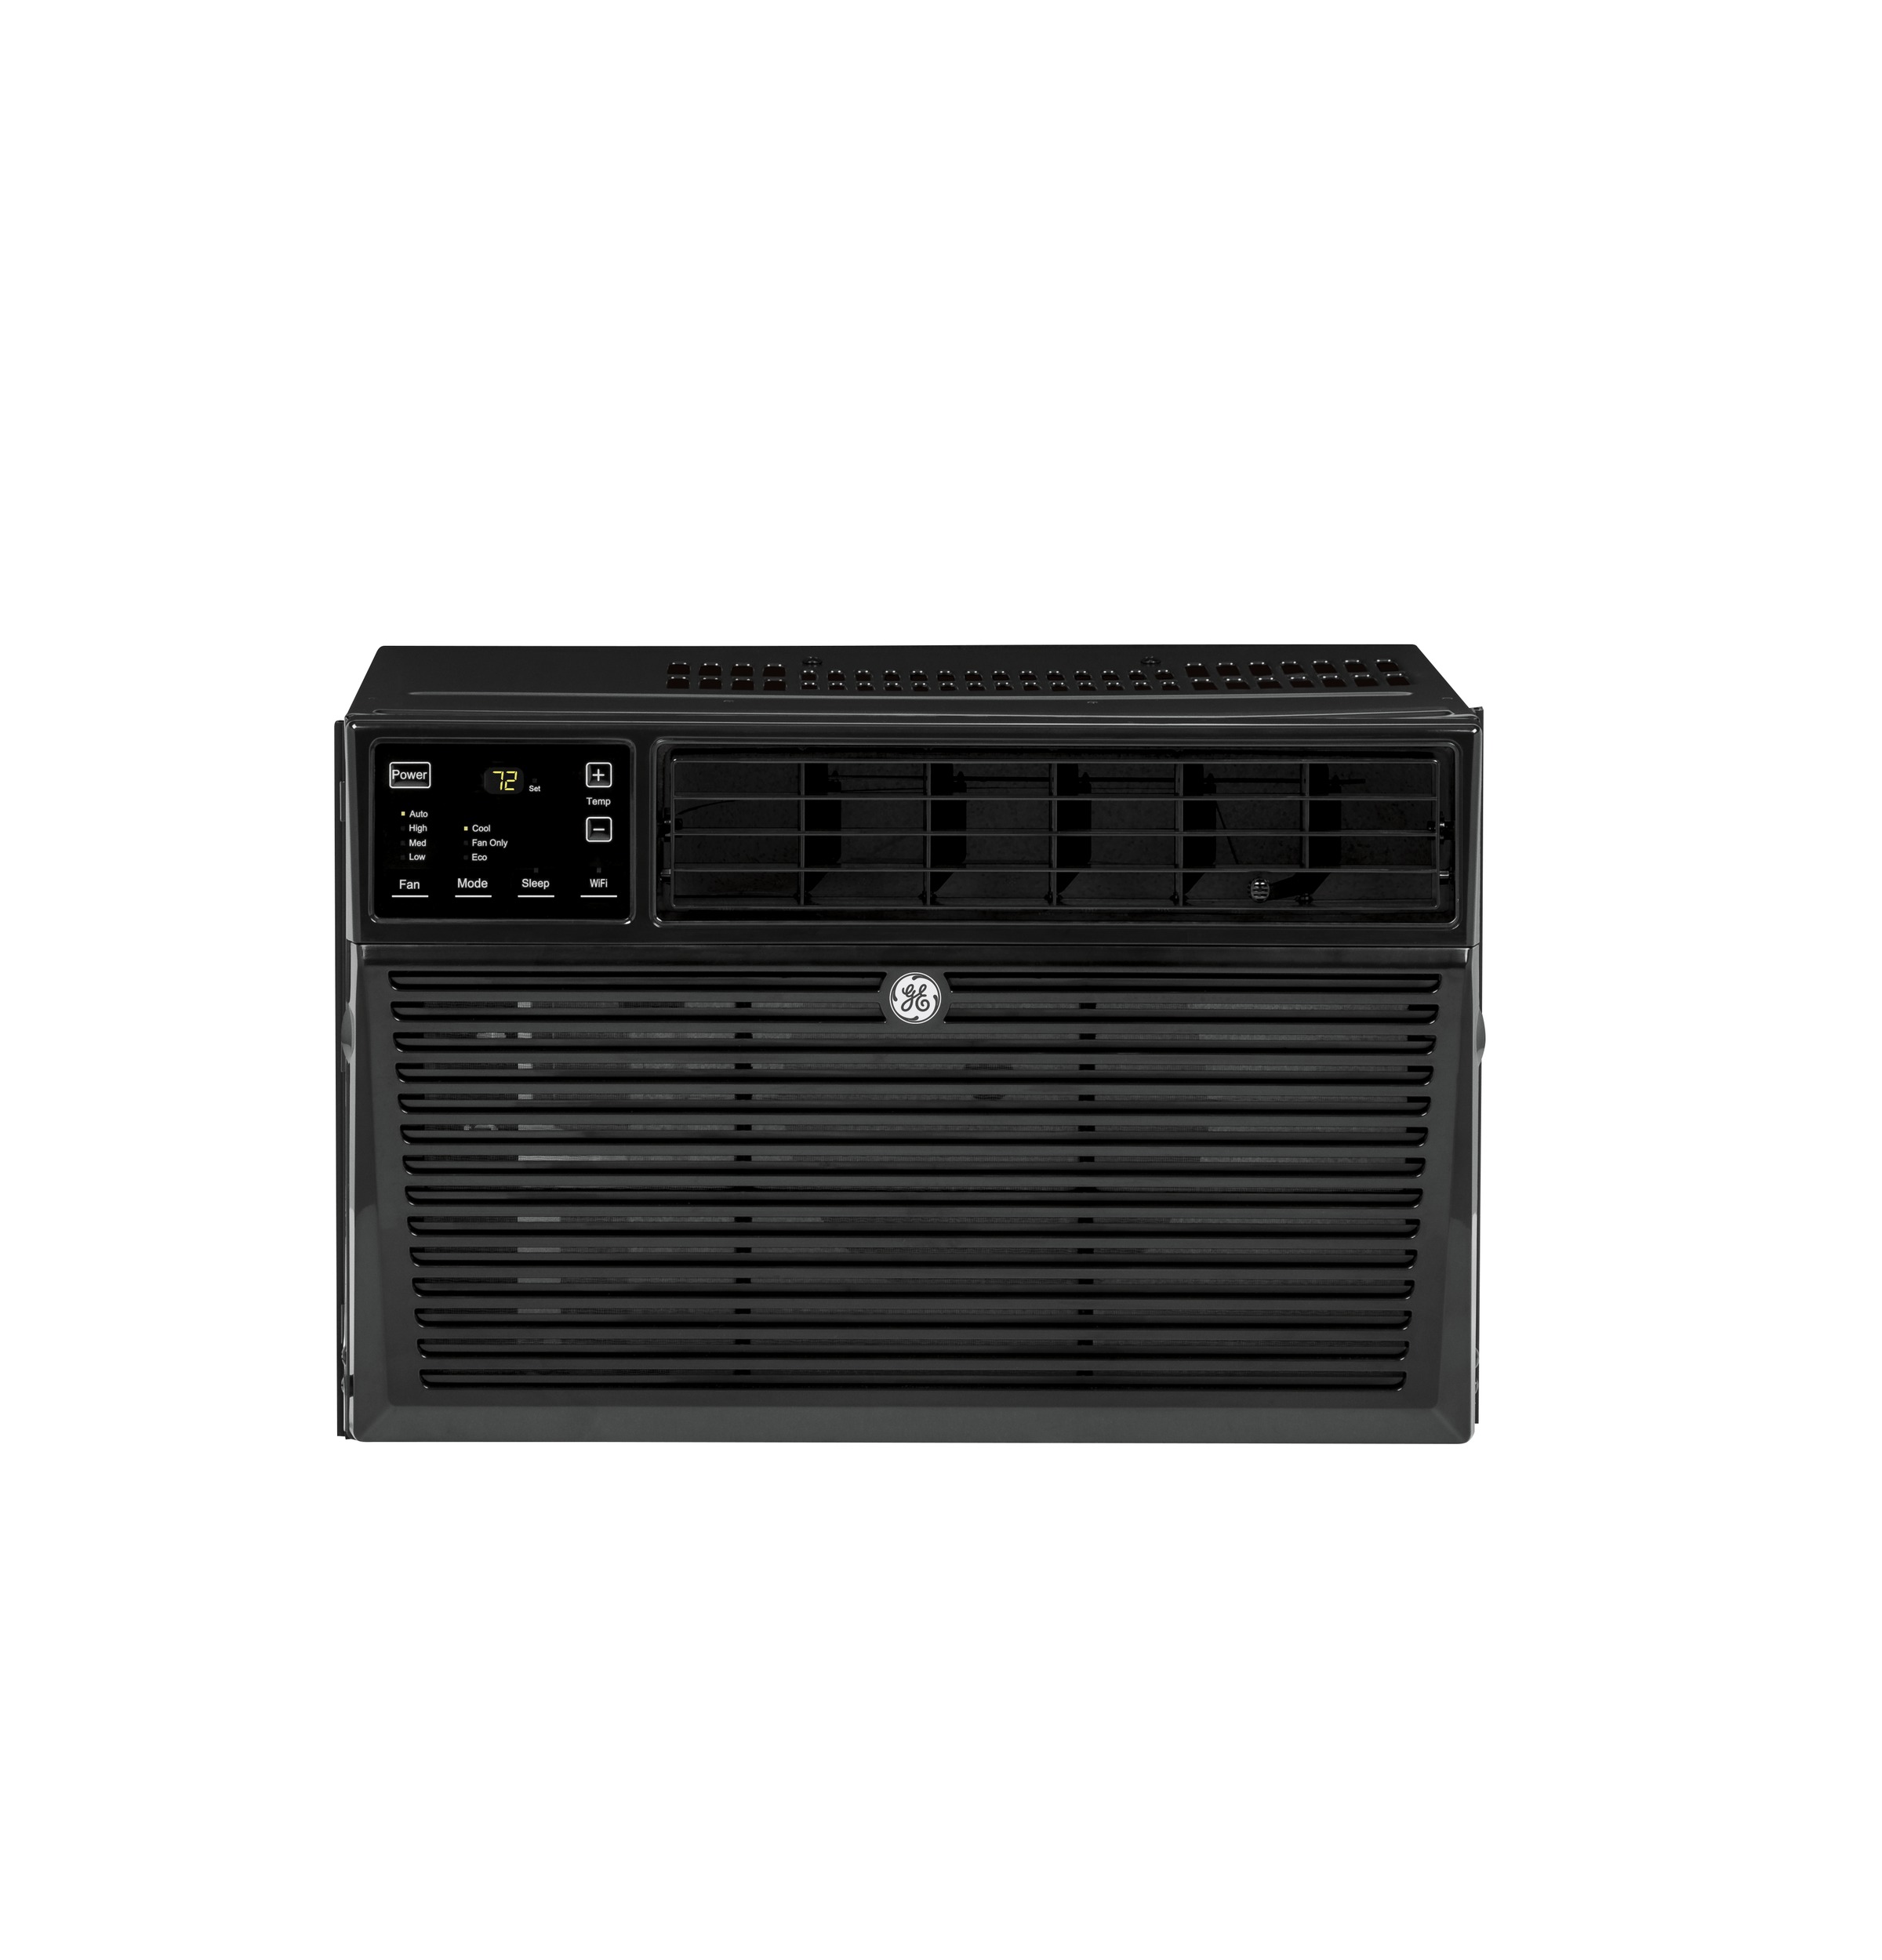 GE® 8,000 BTU Smart Electronic Window Air Conditioner for Medium Rooms up to 350 sq. ft., Black